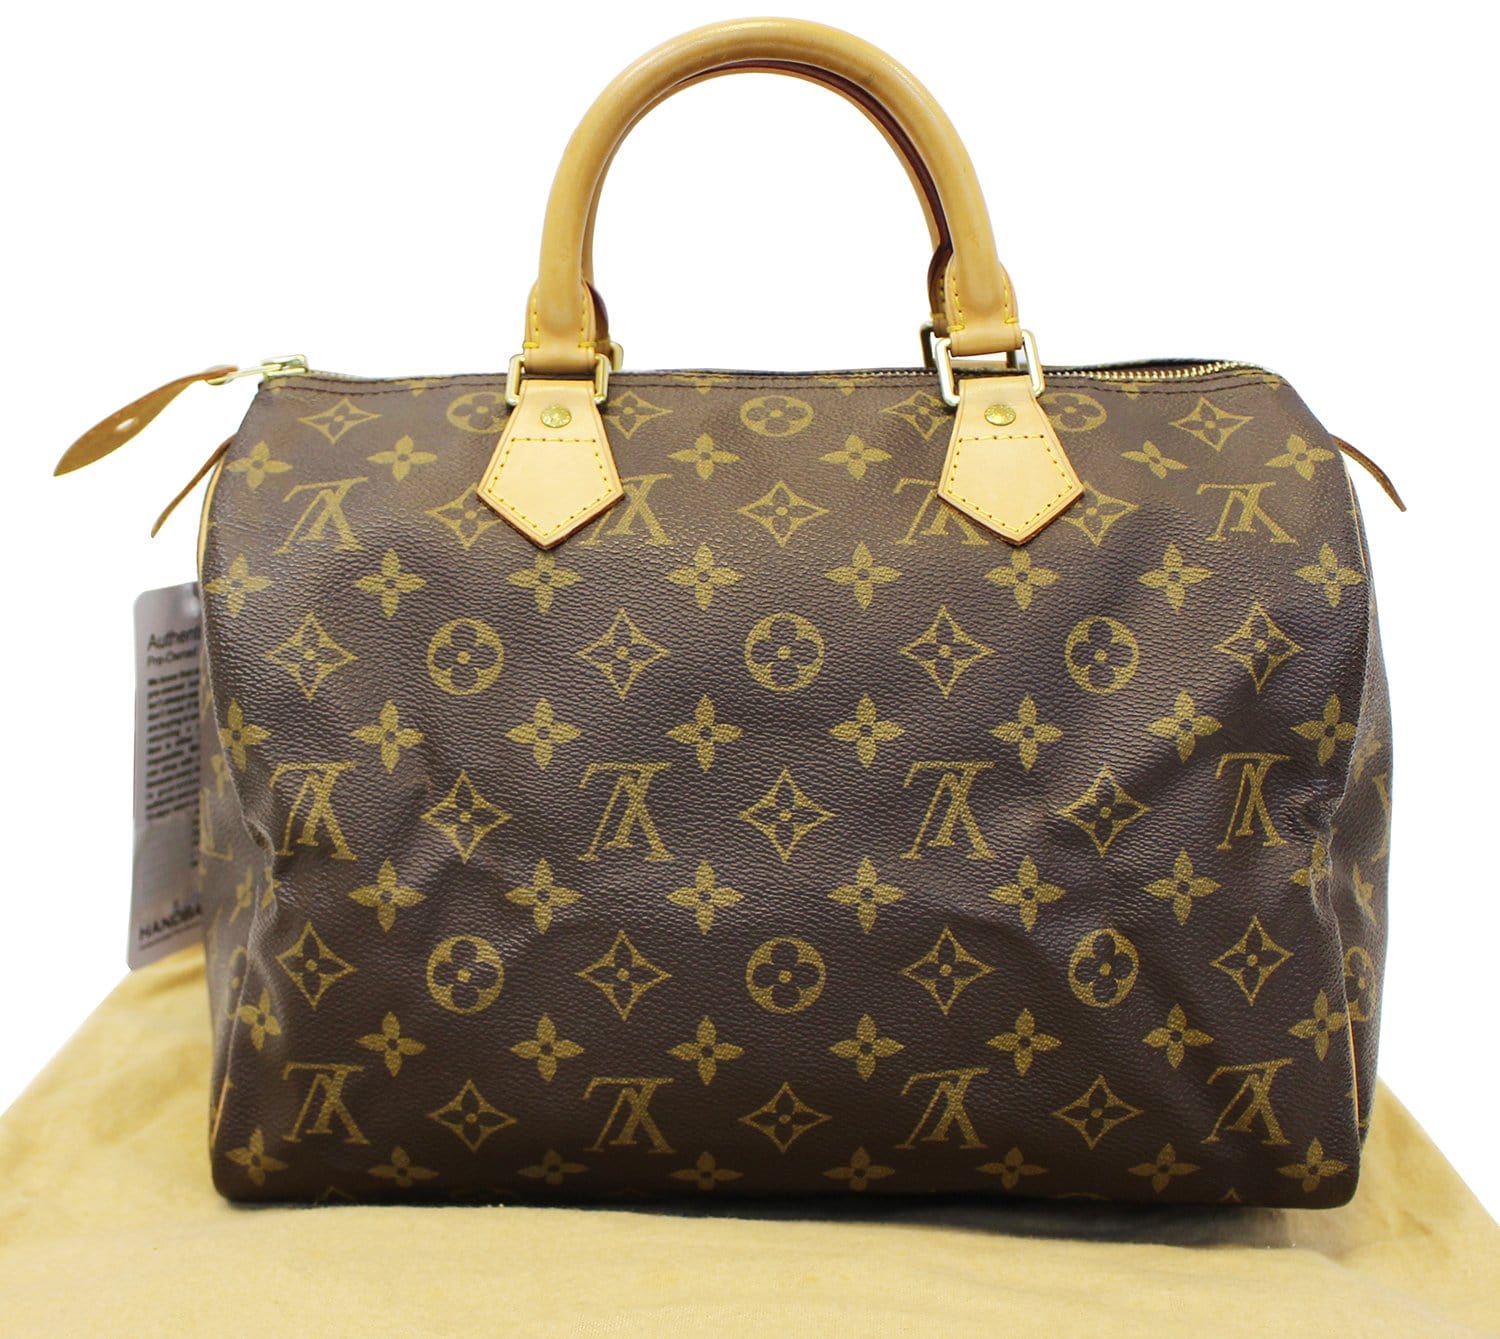 Gently Used Authentic Louis Vuitton Bag for Sale in Washington, DC